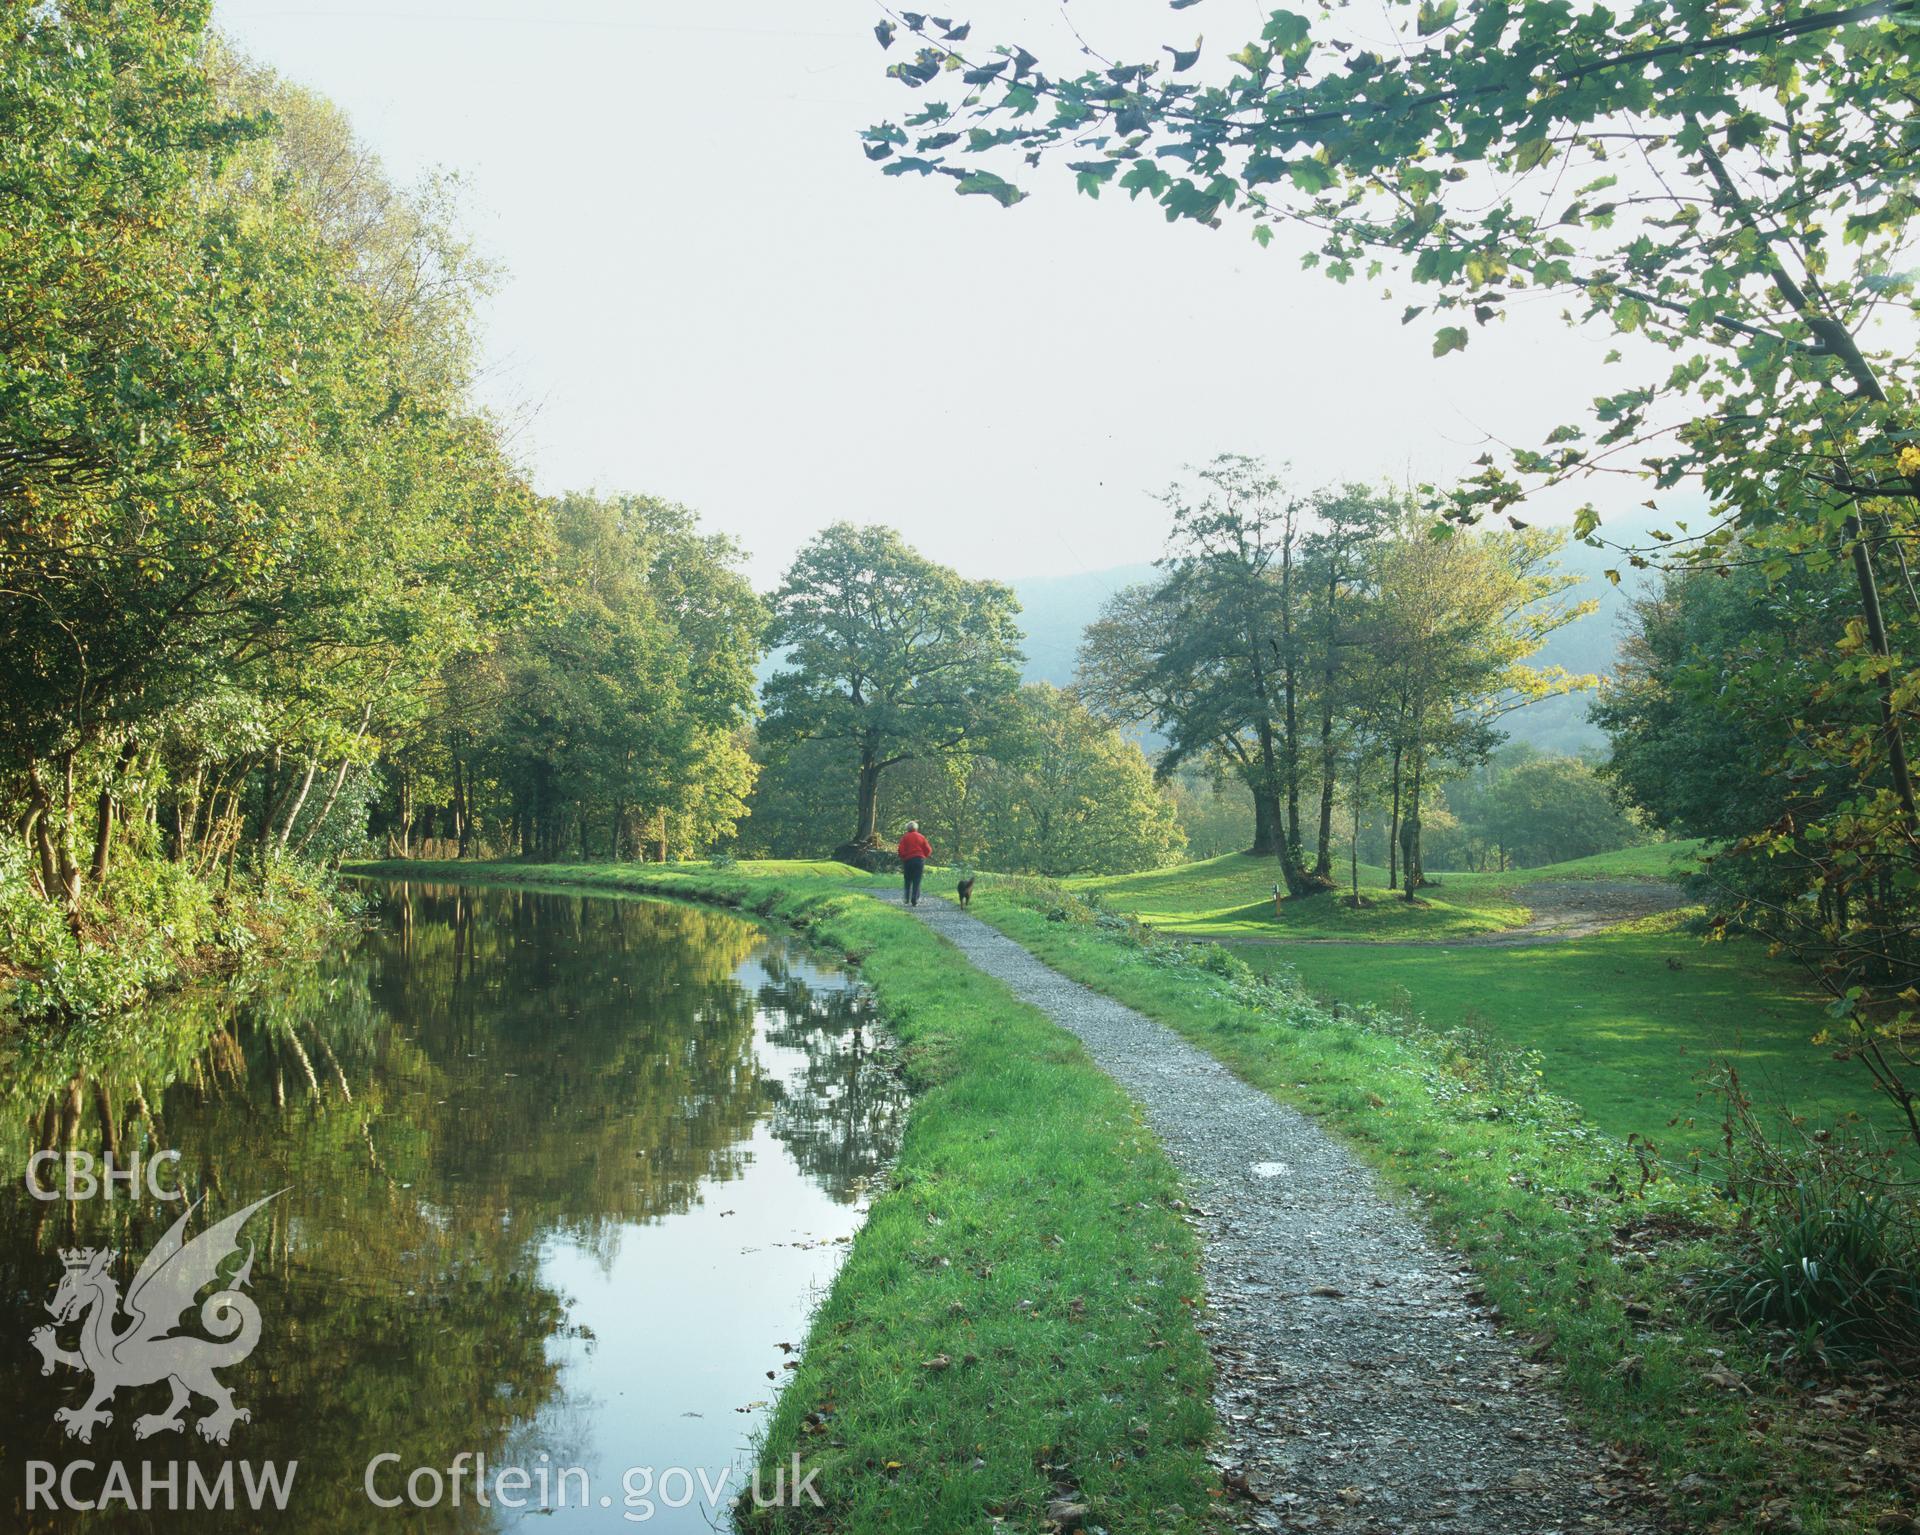 Colour transparency showing  Manor Park section of Swansea Canal, produced by Iain Wright, October 2005.